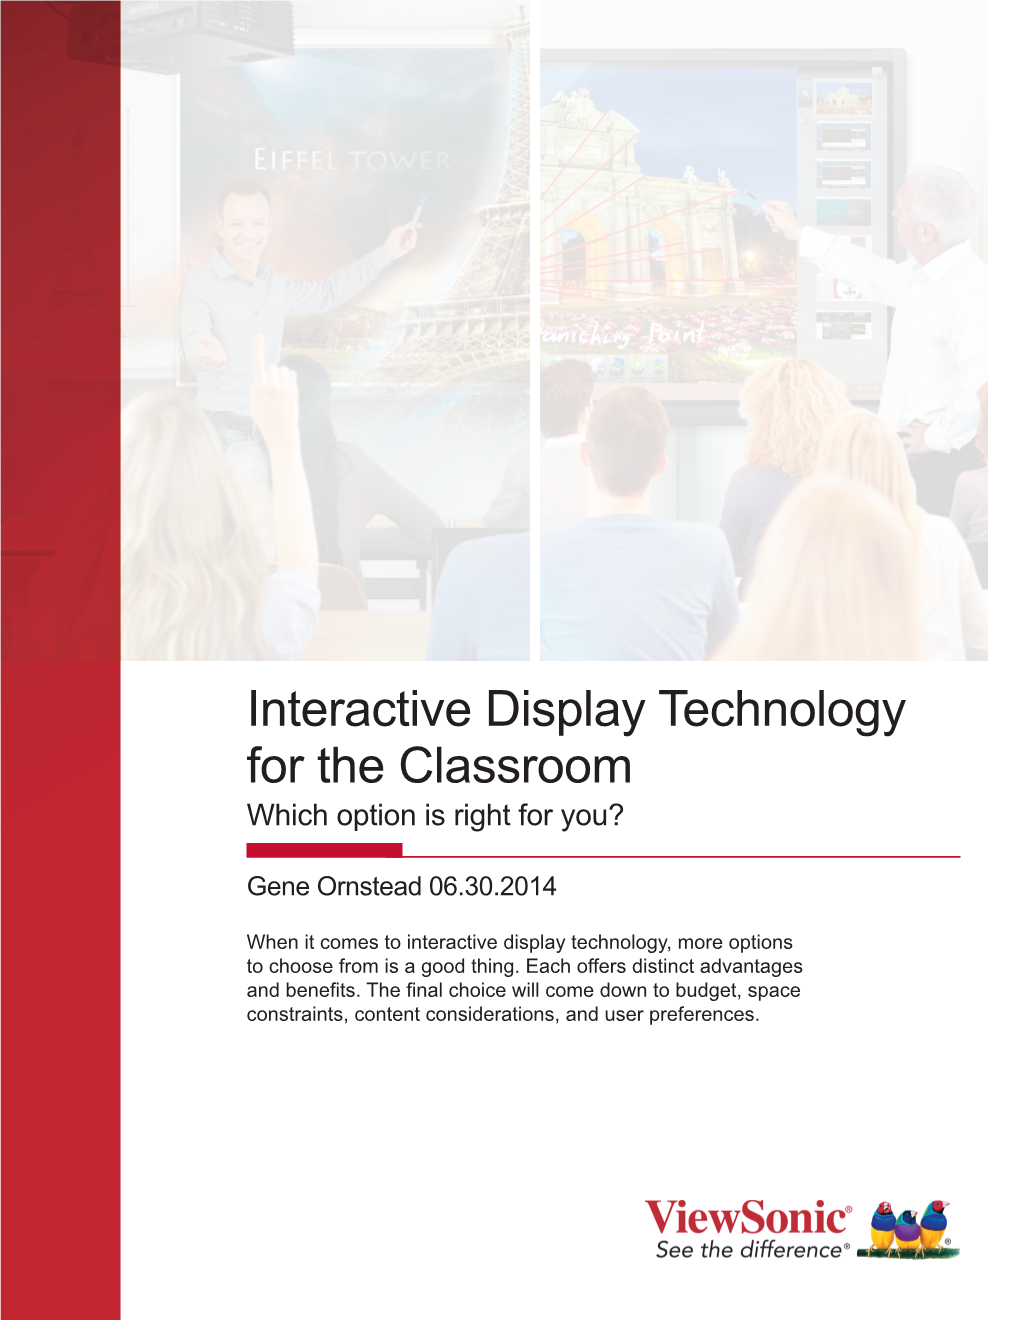 Interactive Display Technology for the Classroom Which Option Is Right for You?